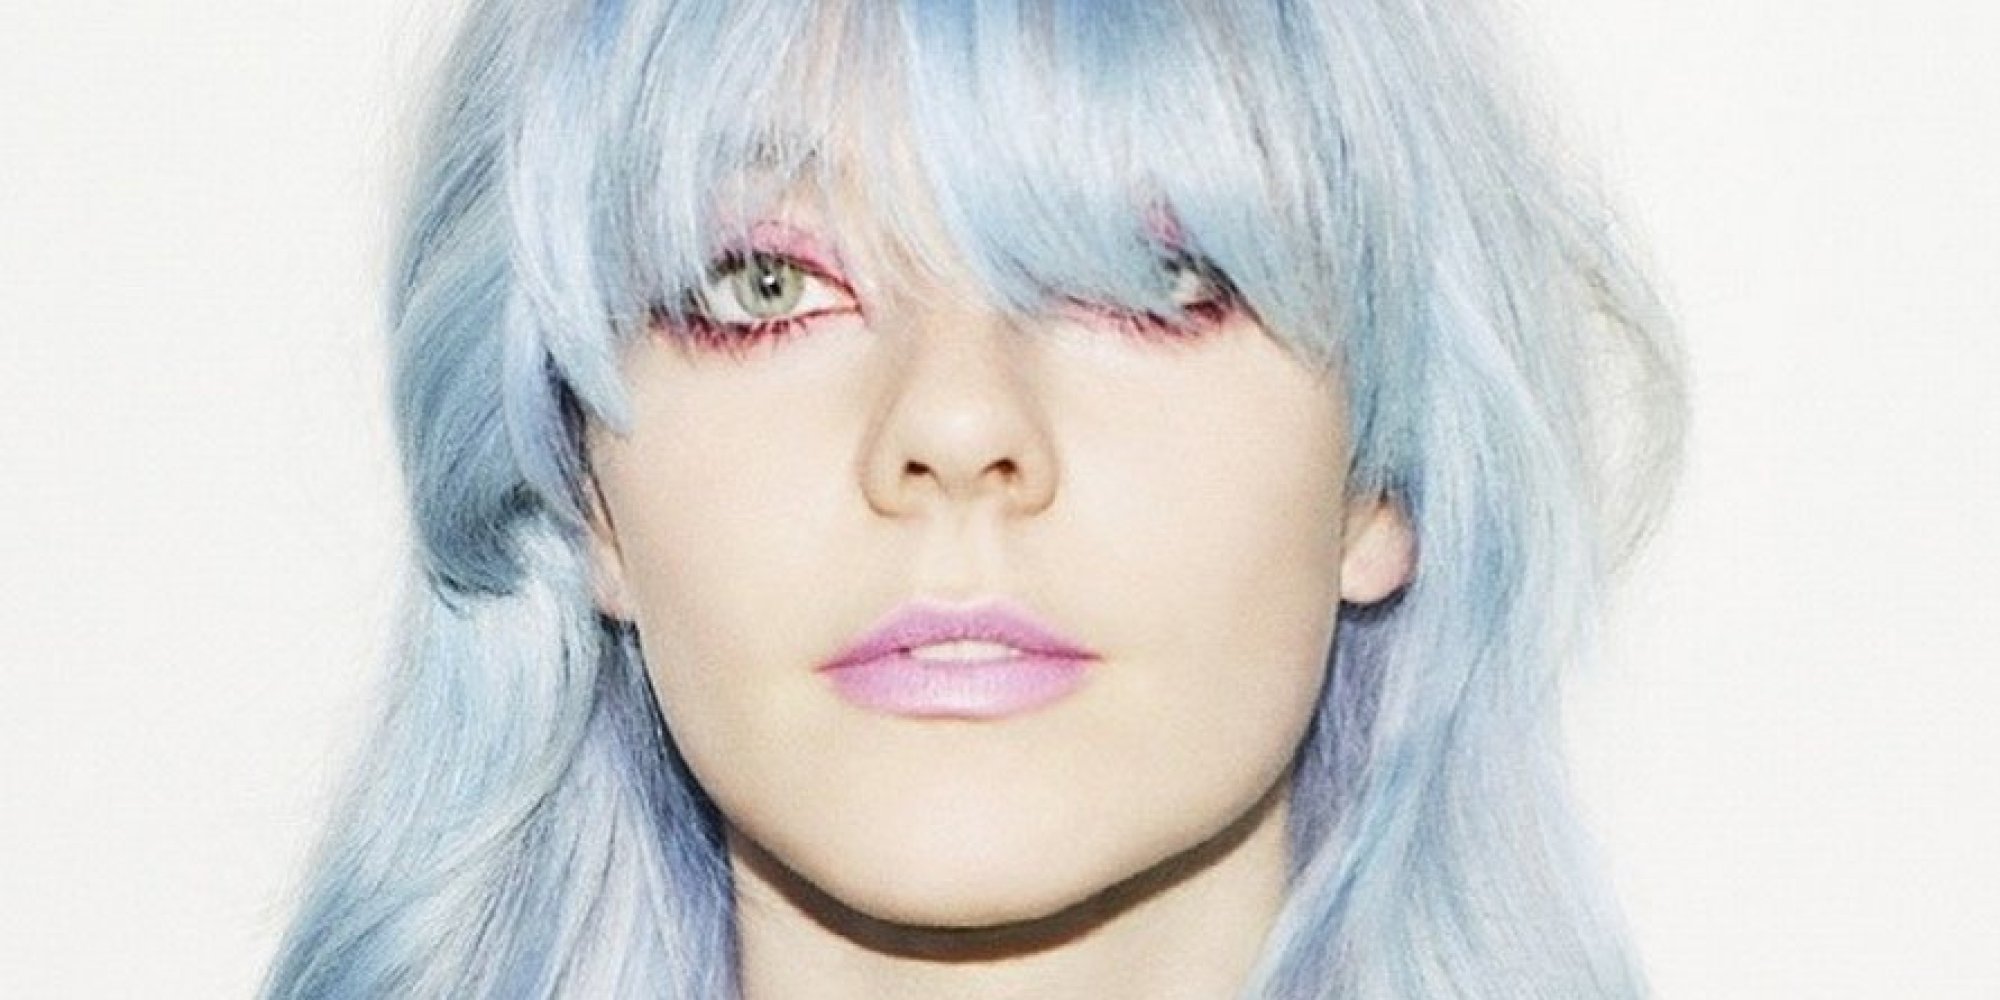 1. "How to Achieve Ice Blue Hair Colour at Home" - wide 7